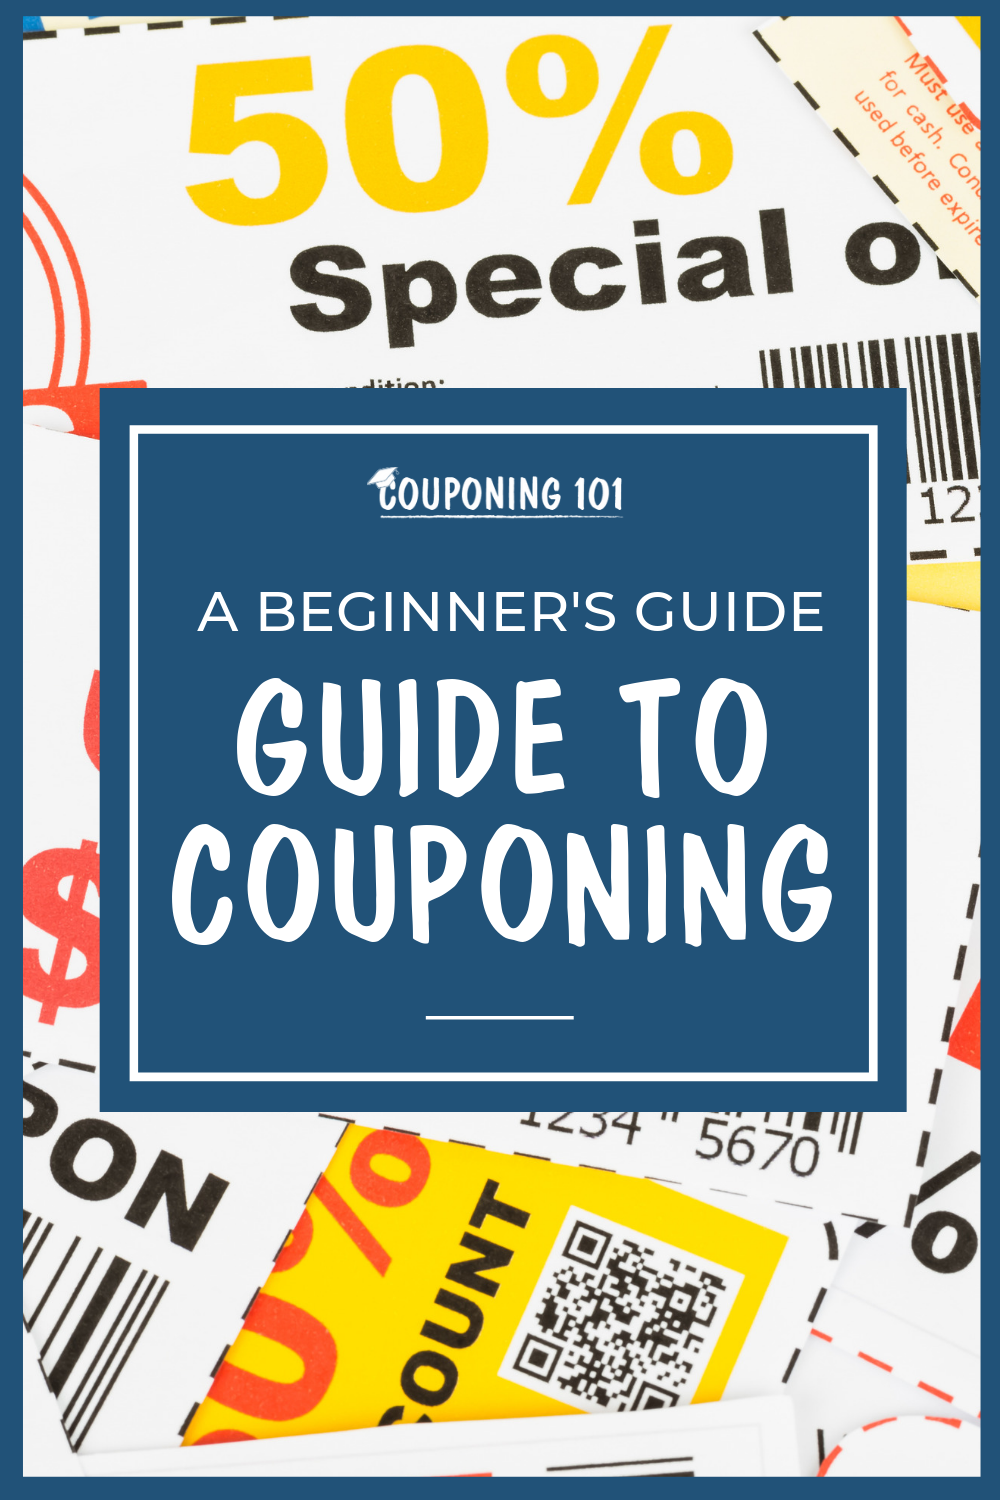 How To Coupon A Beginner's Guide to Couponing Couponing 101